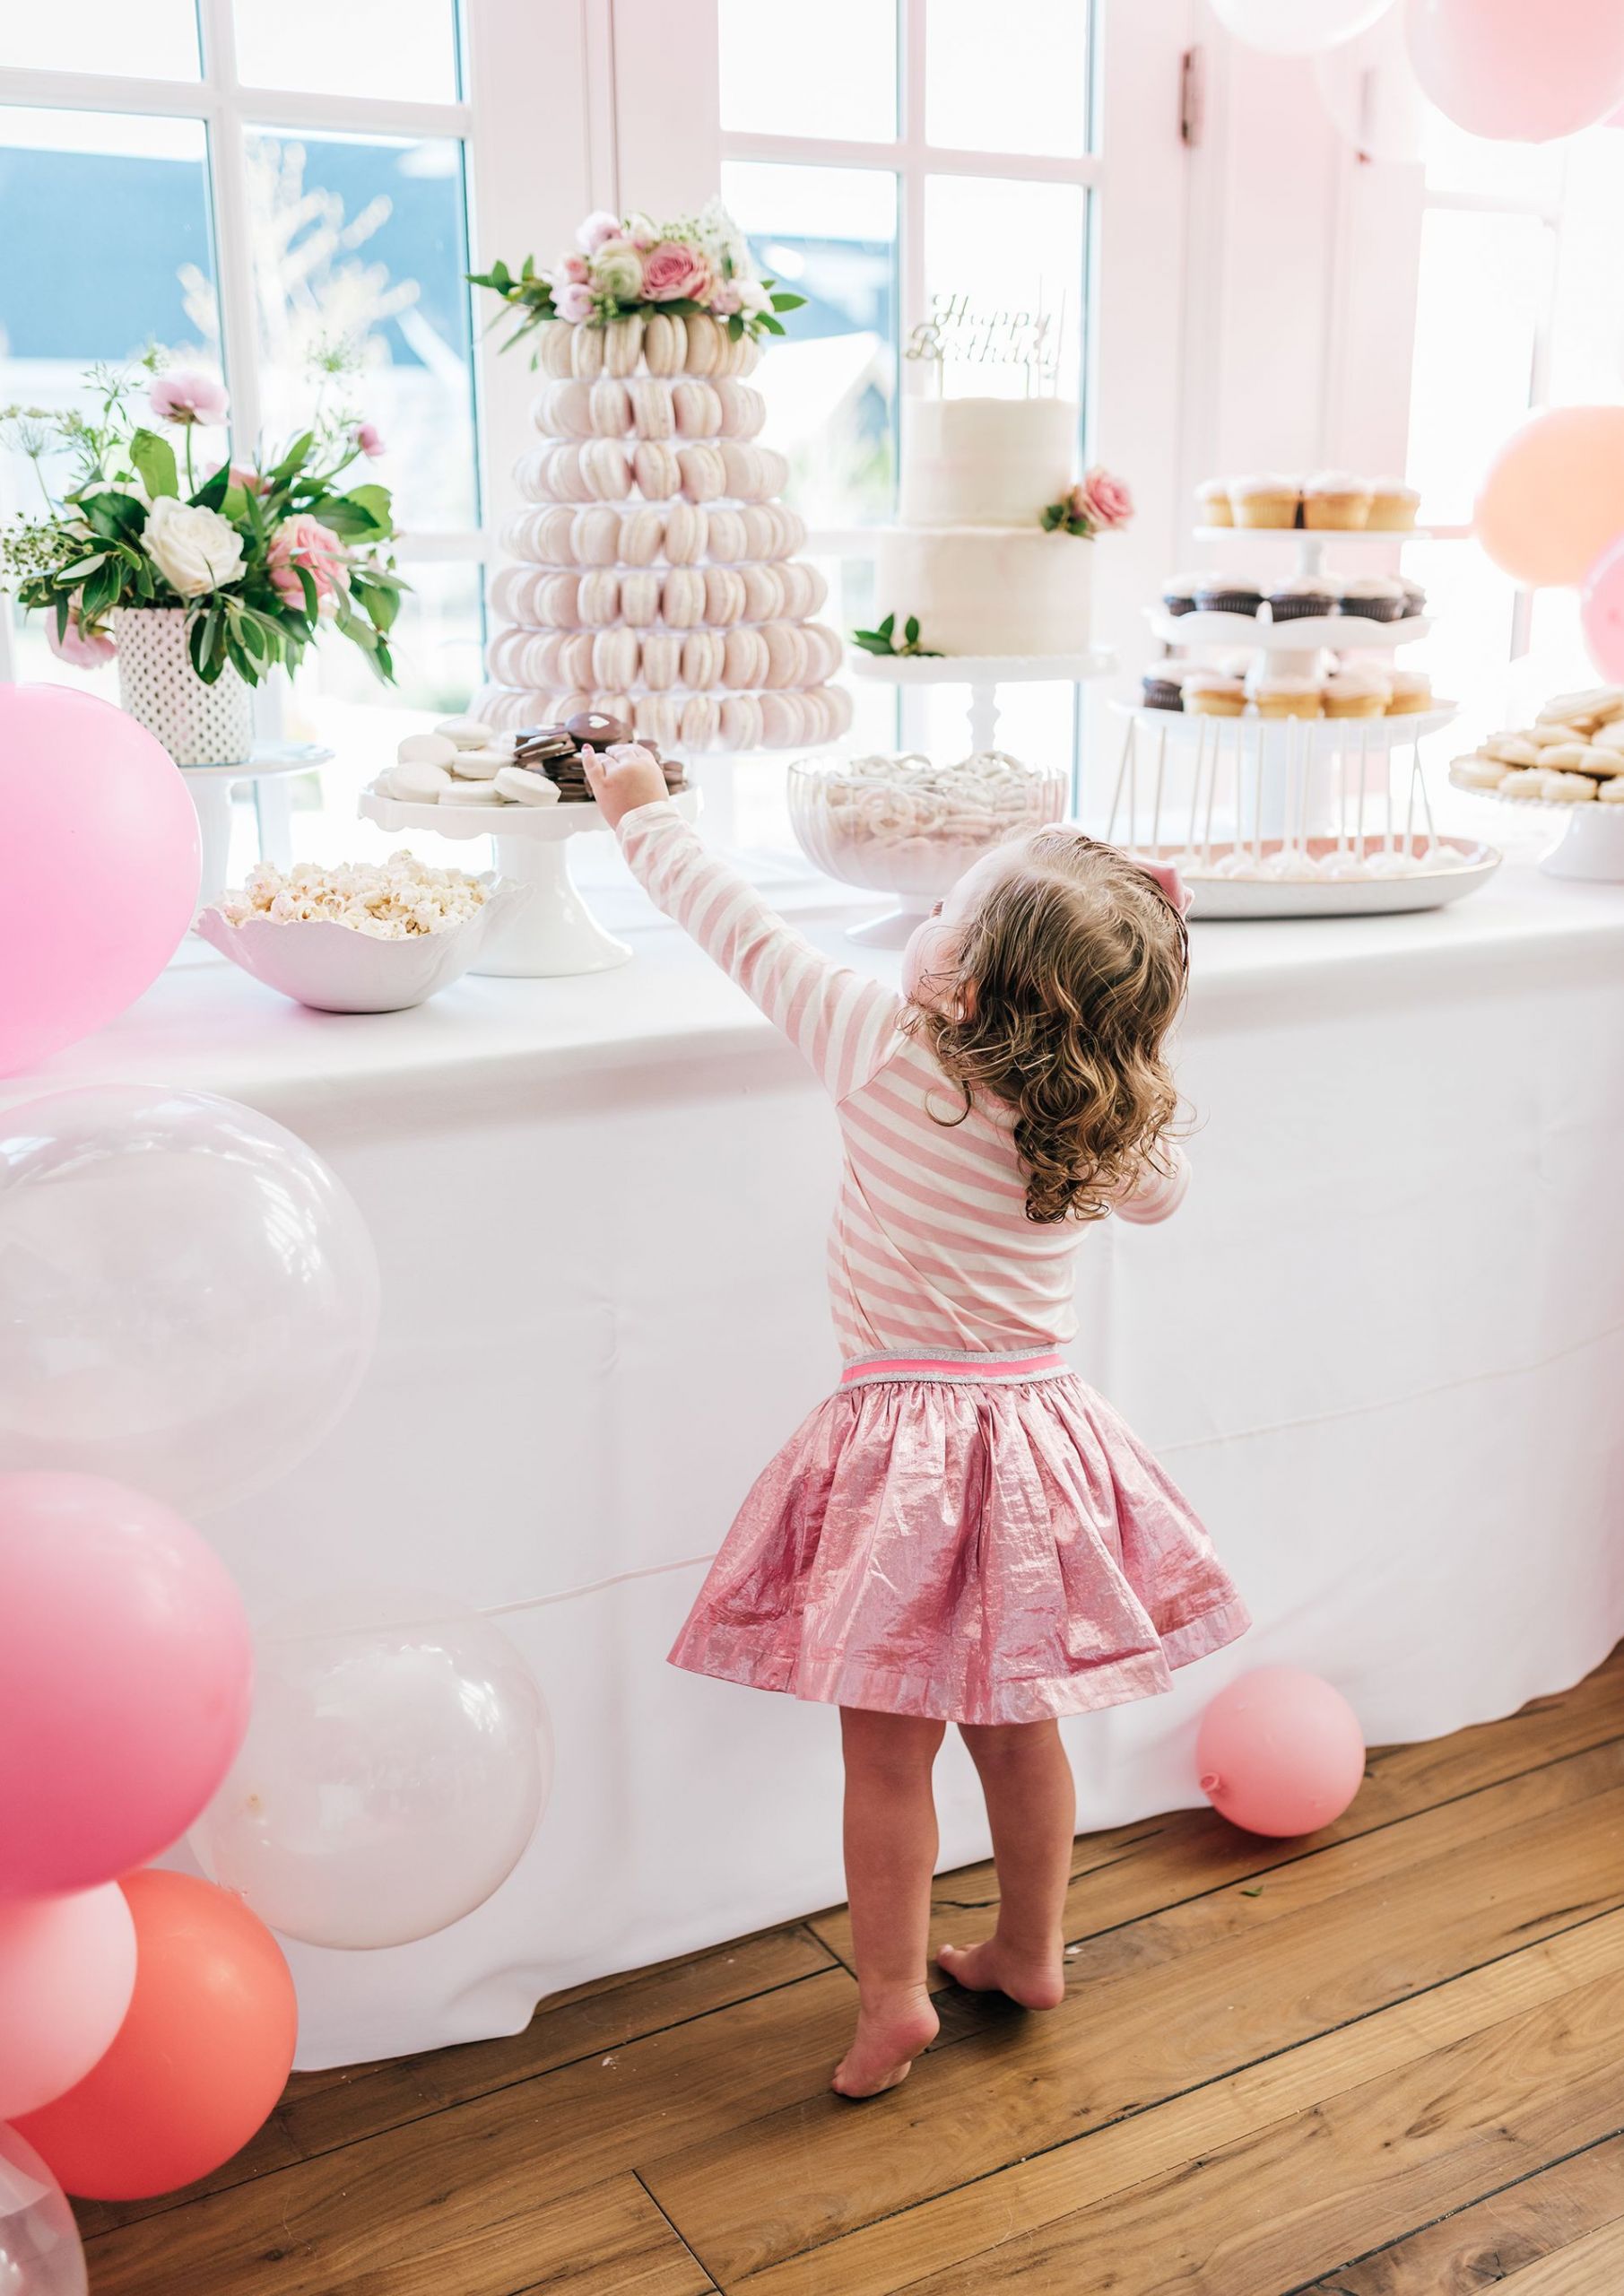 Two Years Old Birthday Party Ideas
 We re So Jealous This Two Year Old s Birthday Party